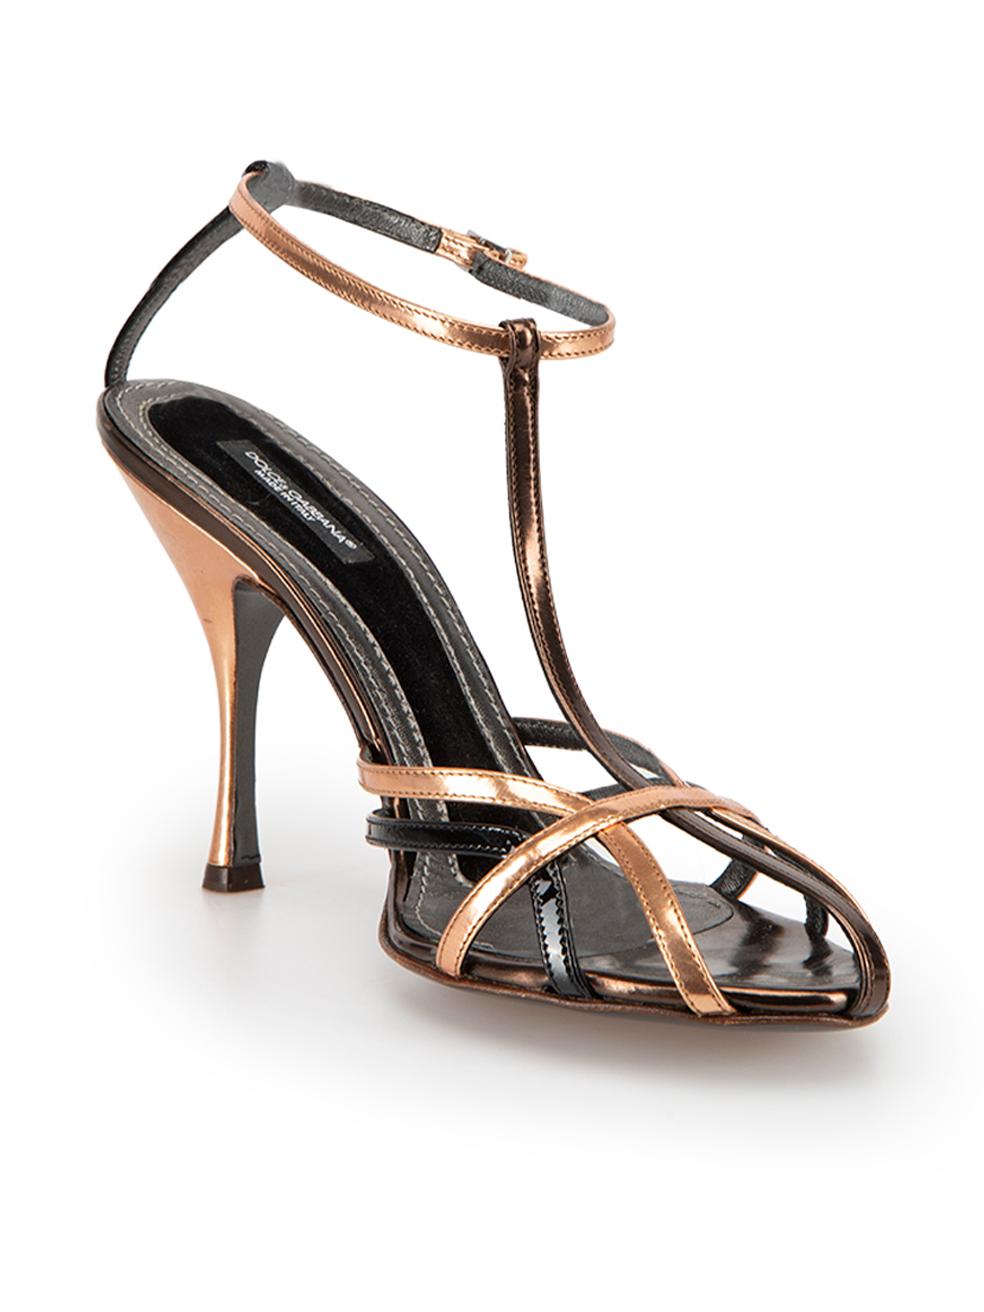 CONDITION is Very good. Hardly any visible wear to heeled sandals is evident on this used Dolce & Gabbana designer resale item. Original box and dust bag are included.



Details


Metallic copper and black

Patent leather 

High heeled